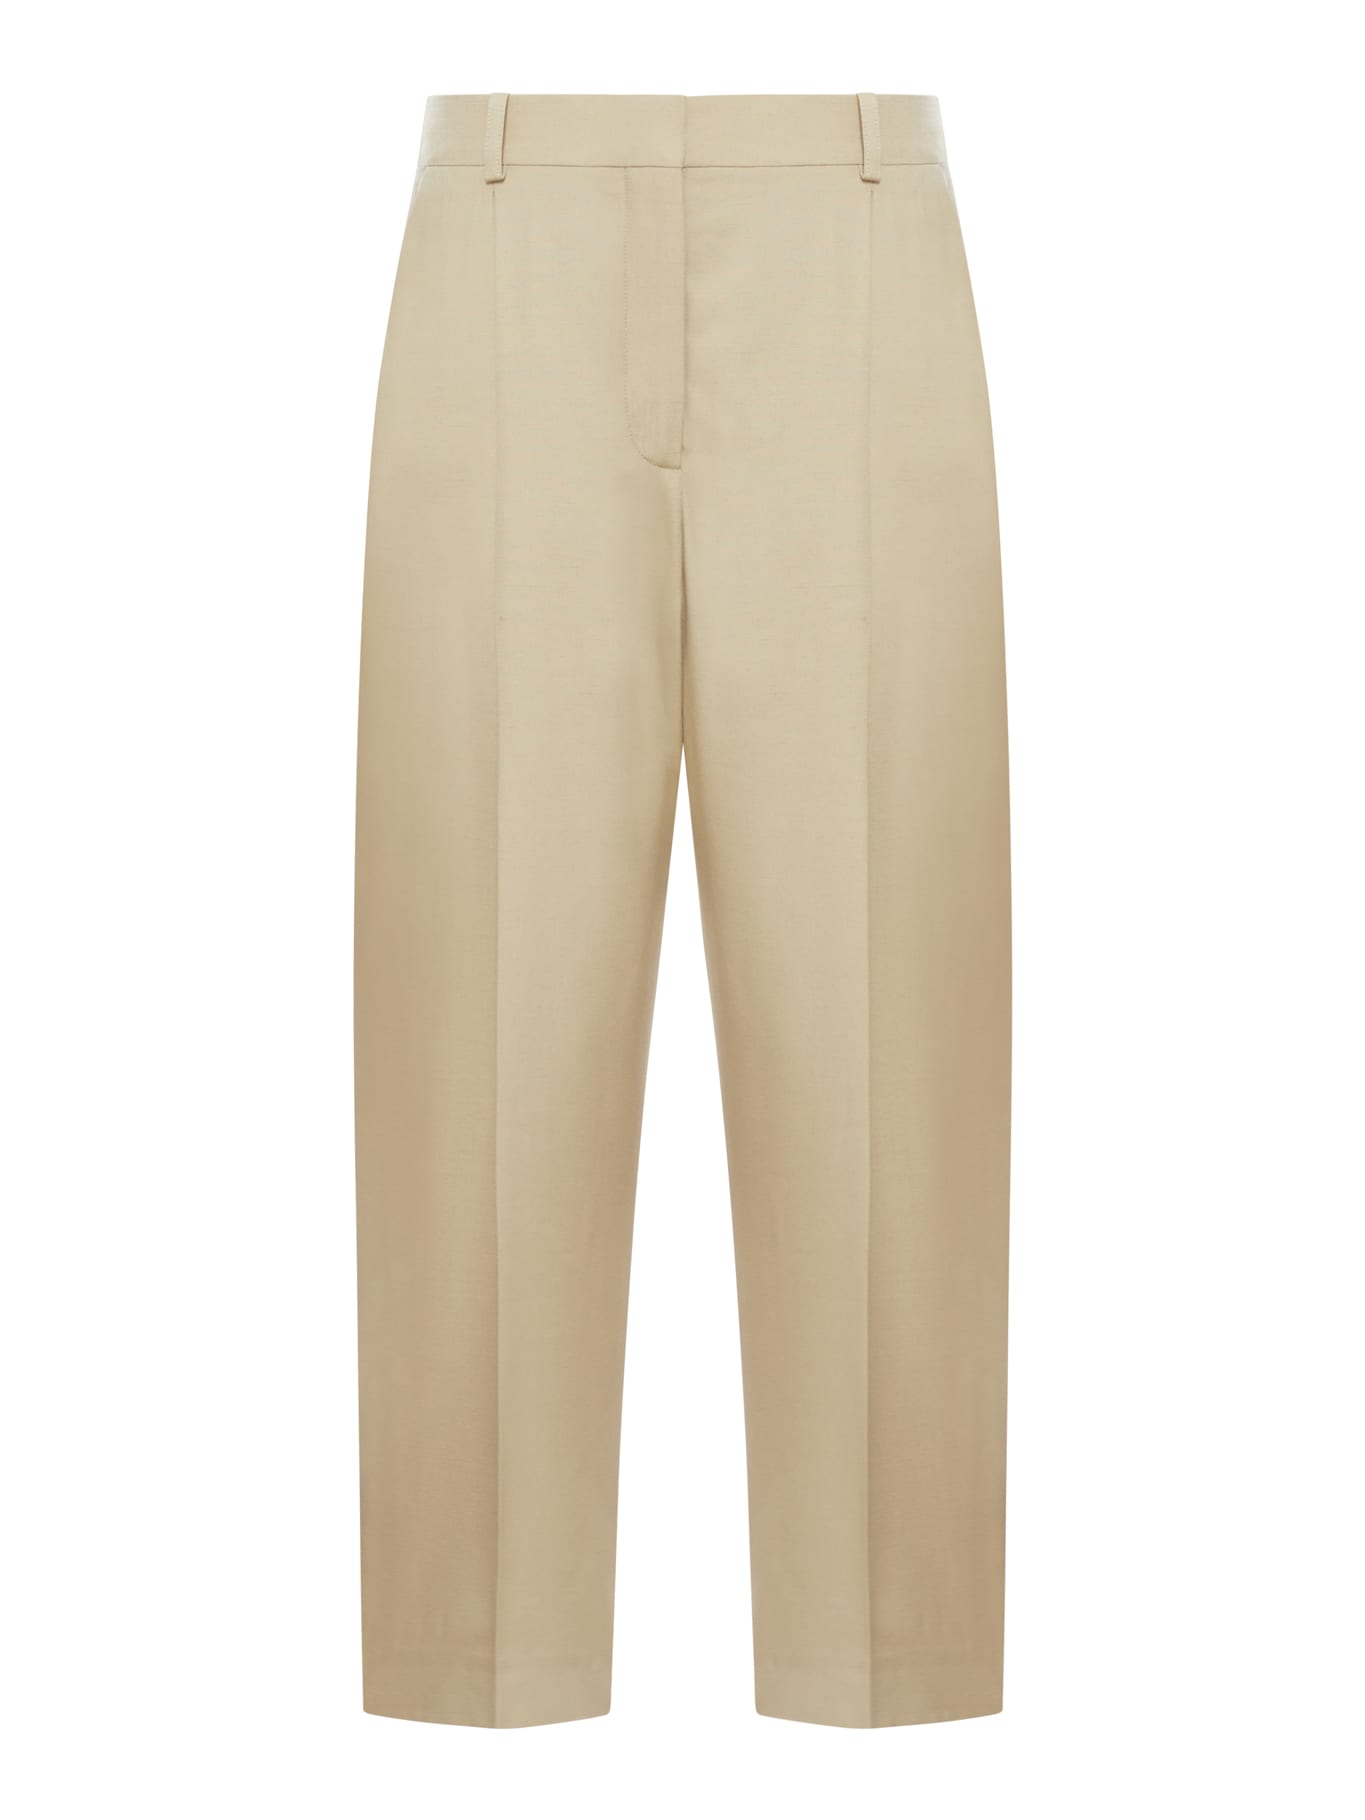 STELLA MCCARTNEY ICONIC CROPPED PLEATED TROUSERS